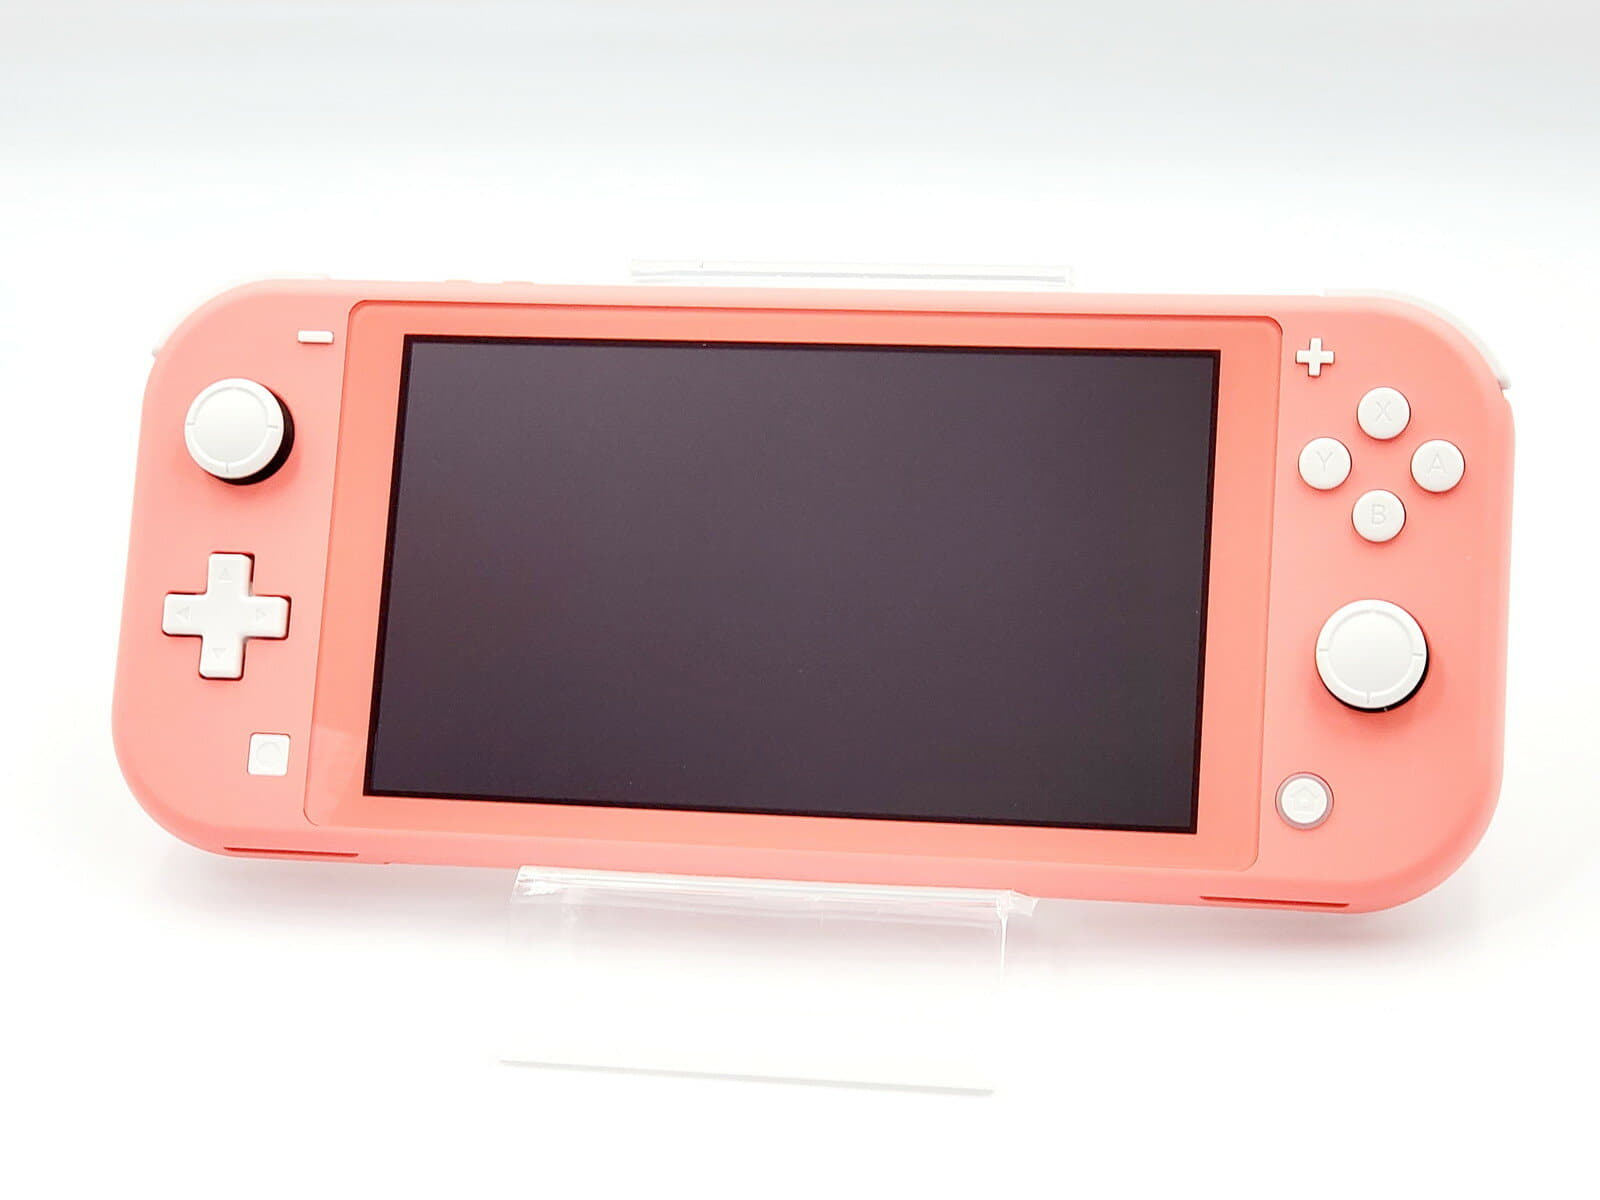 Used], Saturdays, Sundays and holidays shipment, store receipt possible A  rank Nintendo Switch lite Nintendo Switch light HDH-001 Coral used goods  4902370545302 pink #6115 - BE FORWARD Store